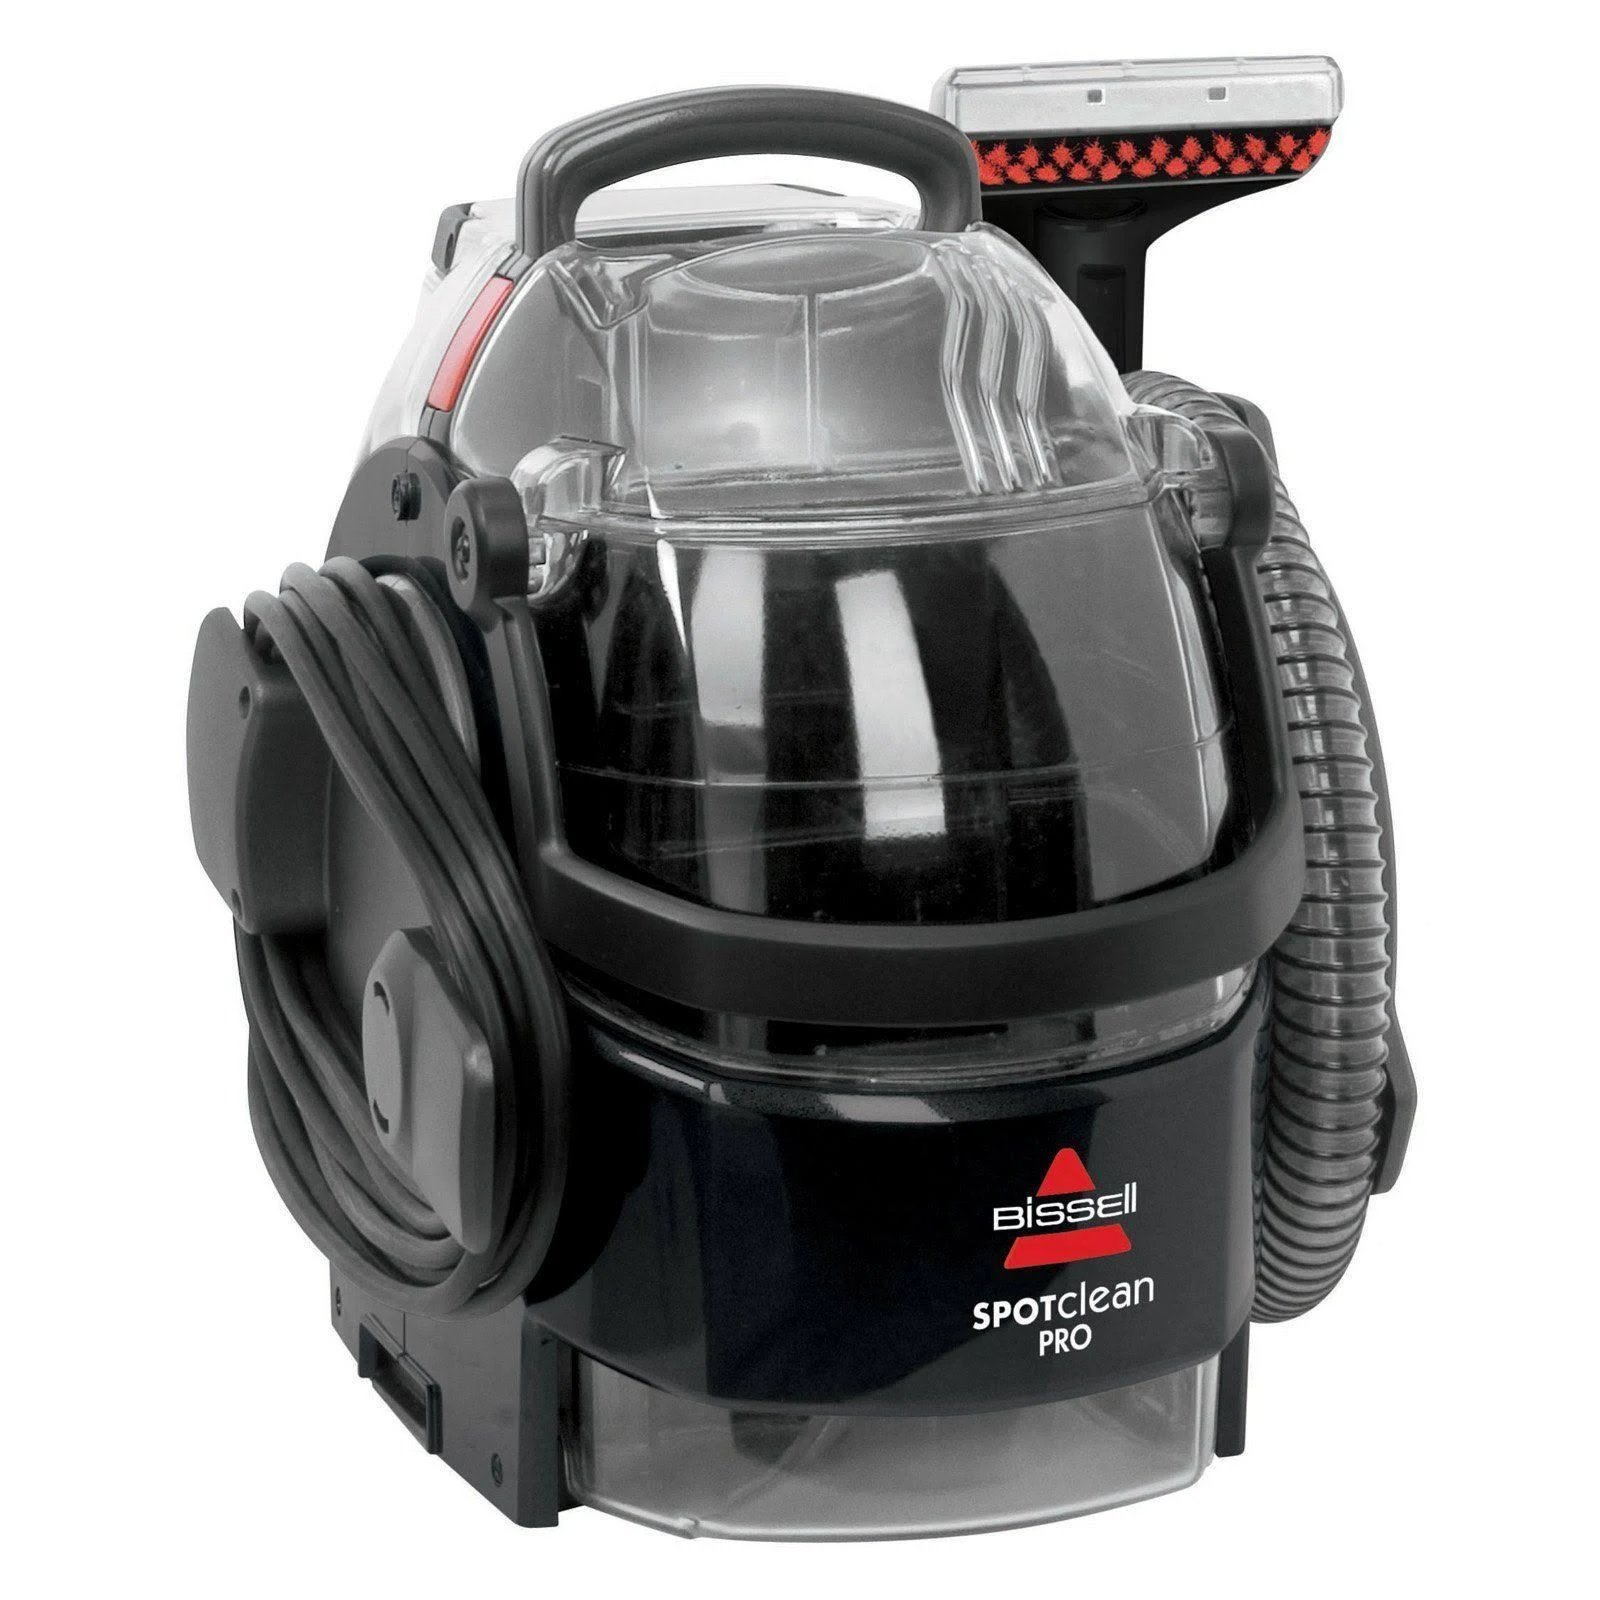 Bissell Spotclean Pro™ Portable Carpet Cleaner